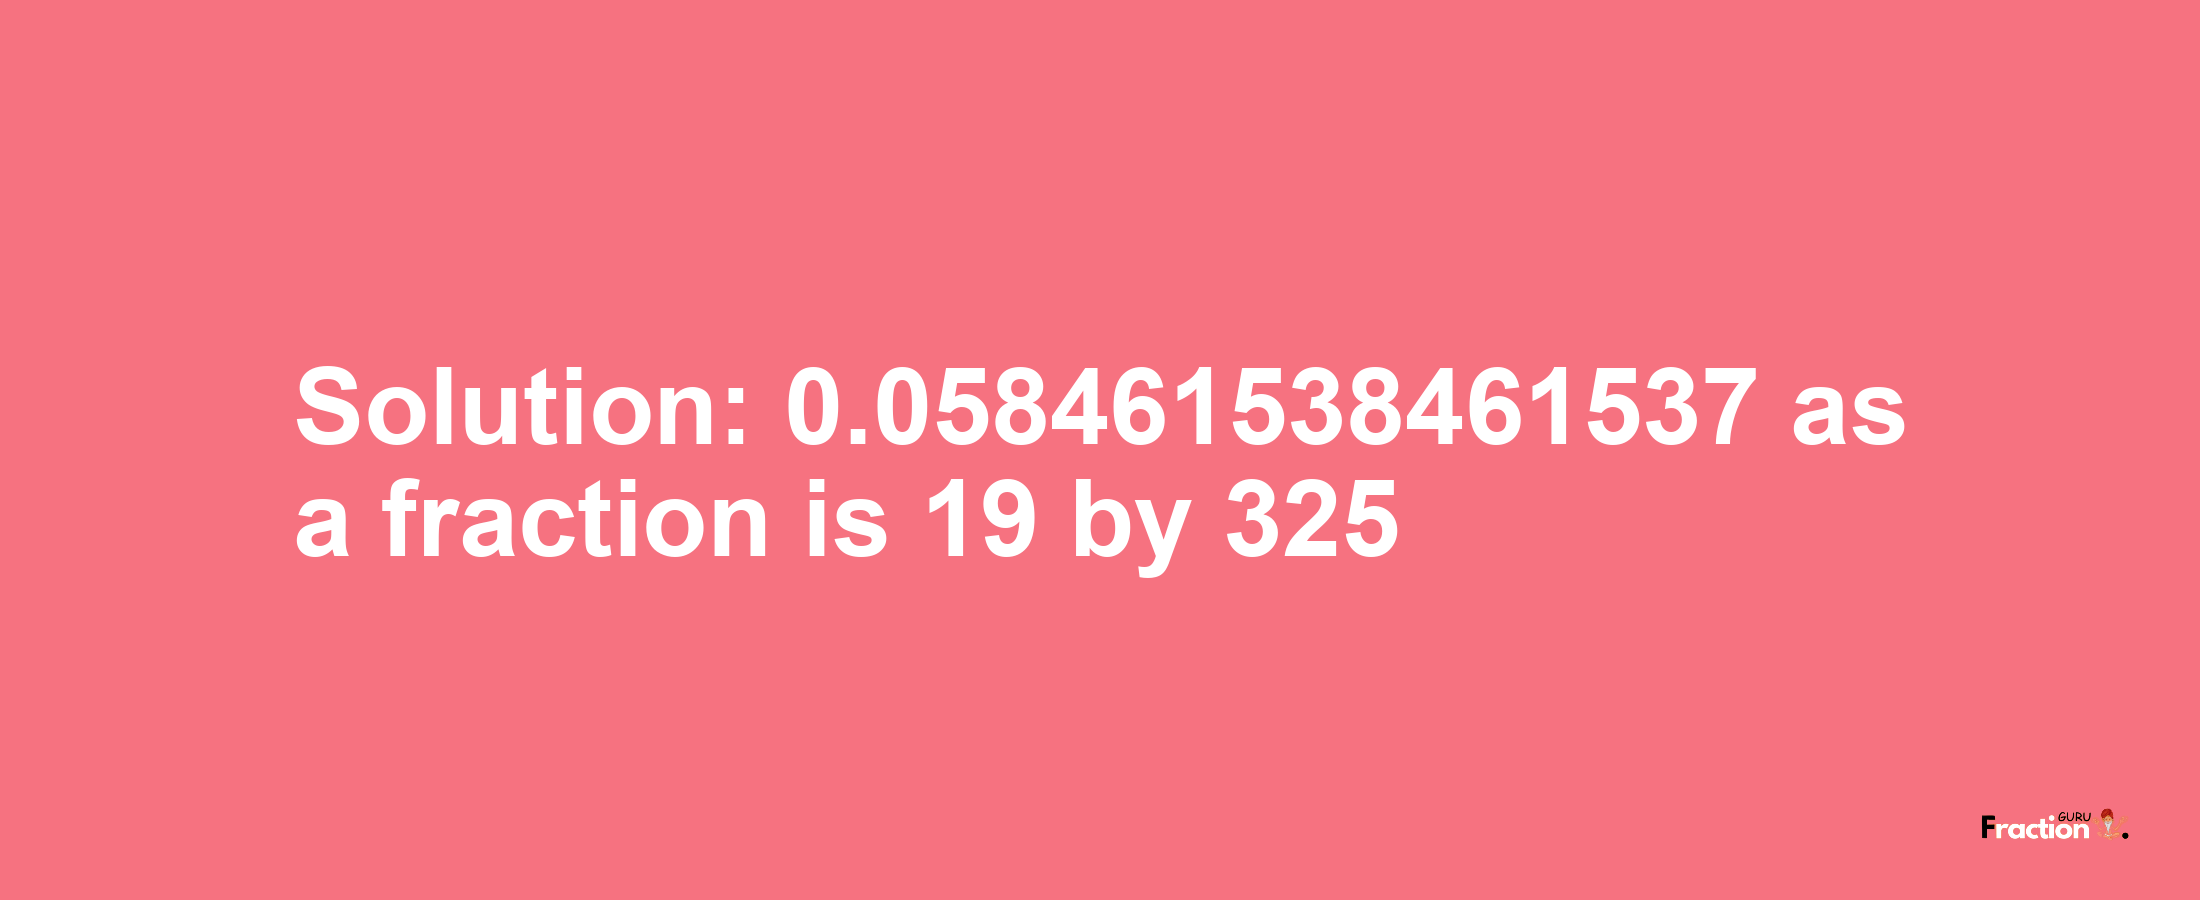 Solution:0.058461538461537 as a fraction is 19/325